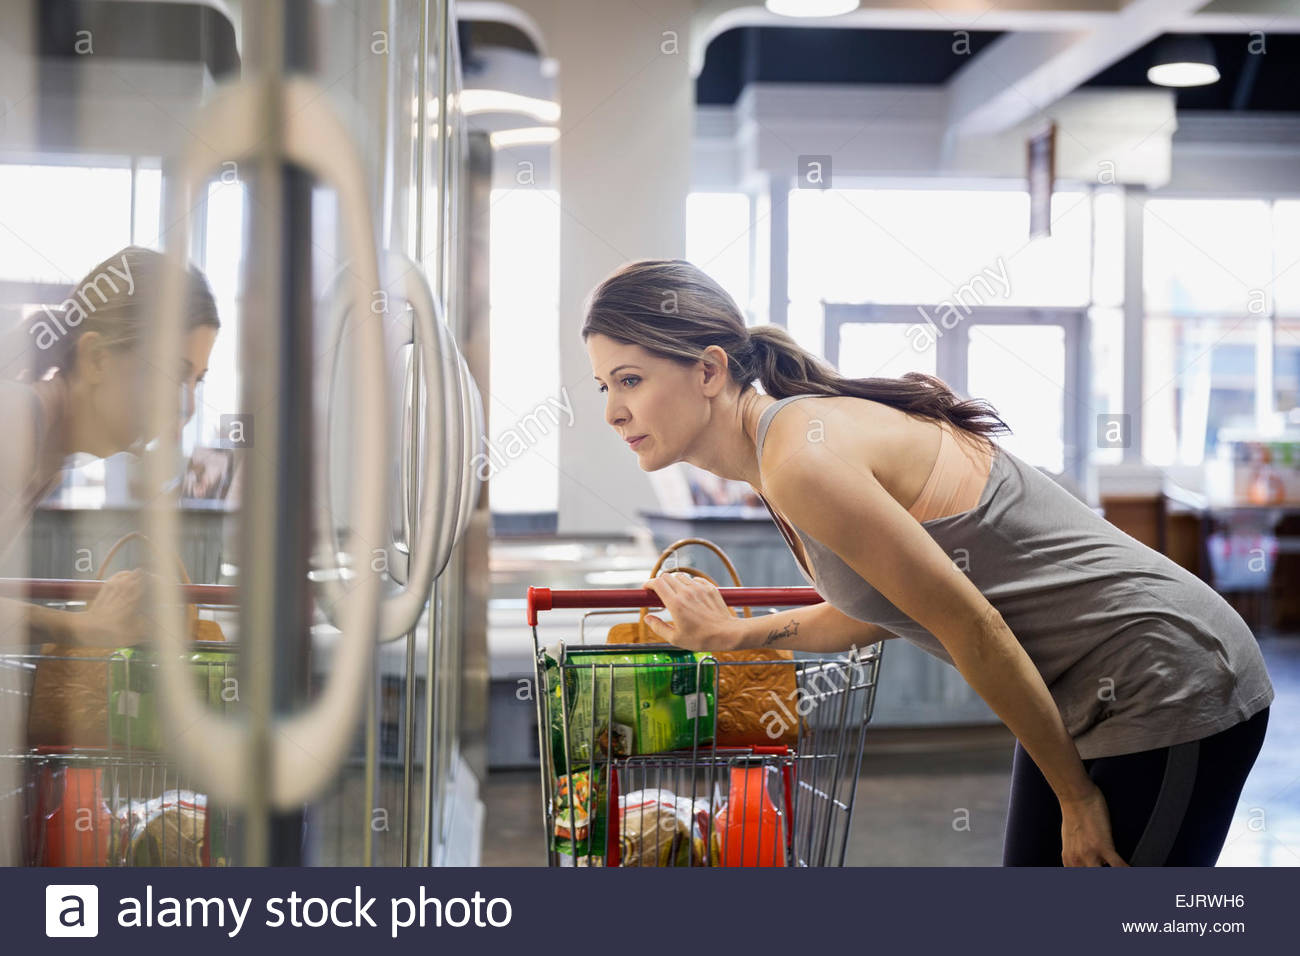 Woman shopping frozen foods in grocery store Stock Photo